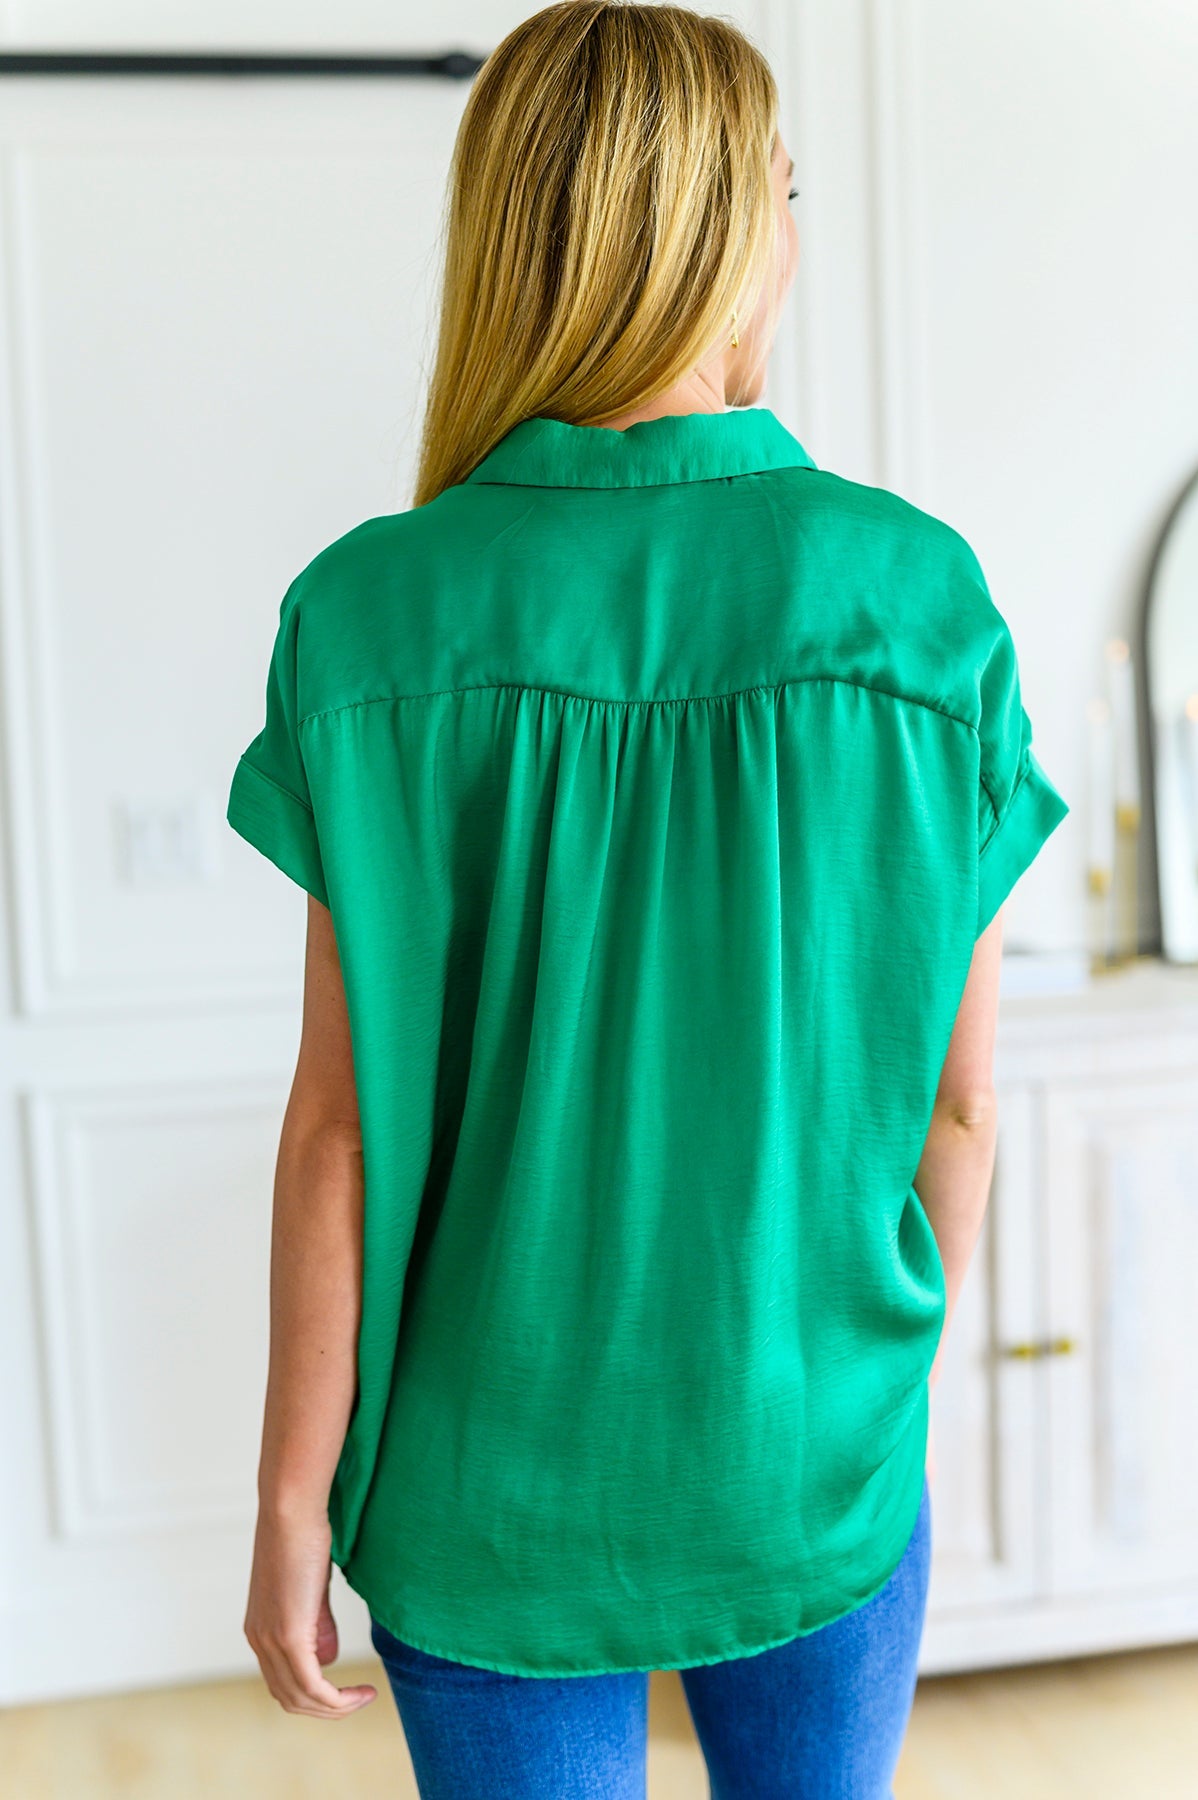 Brand Collab Working On Me Top in Kelly Green